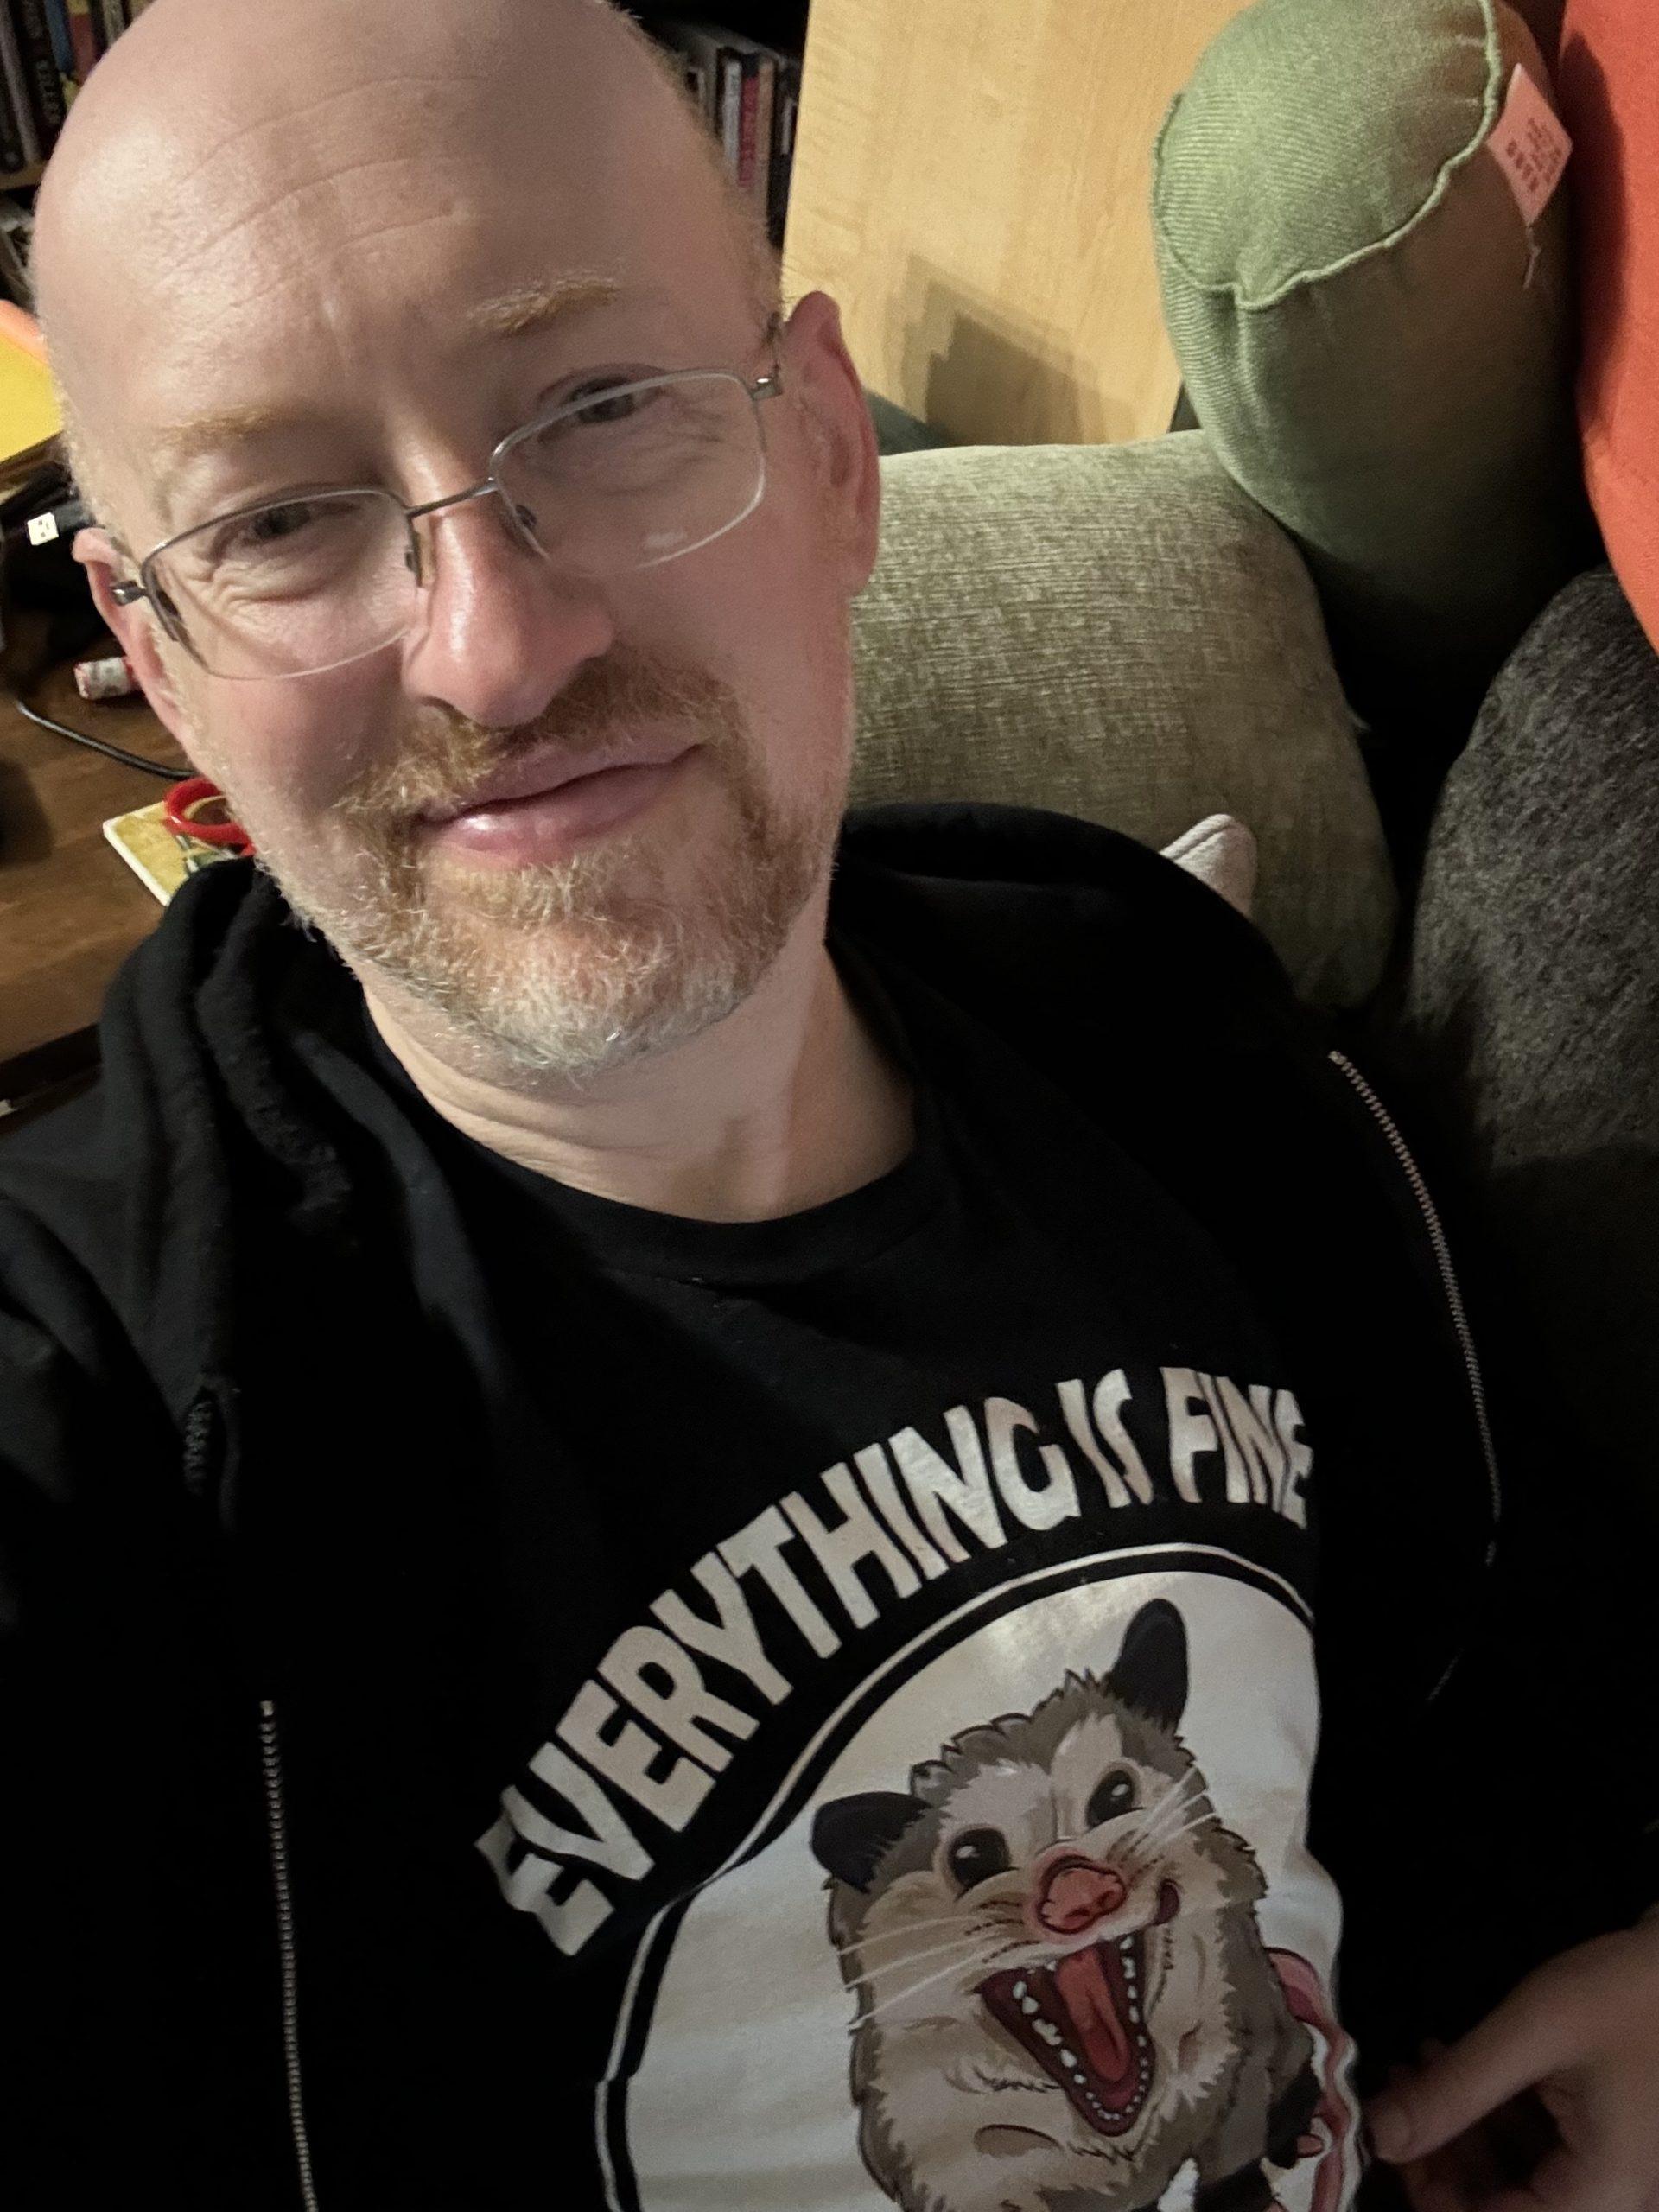 Me wearing a black t-shirt with an illustration of a hissing oppossum and the words 'everything is fine'.